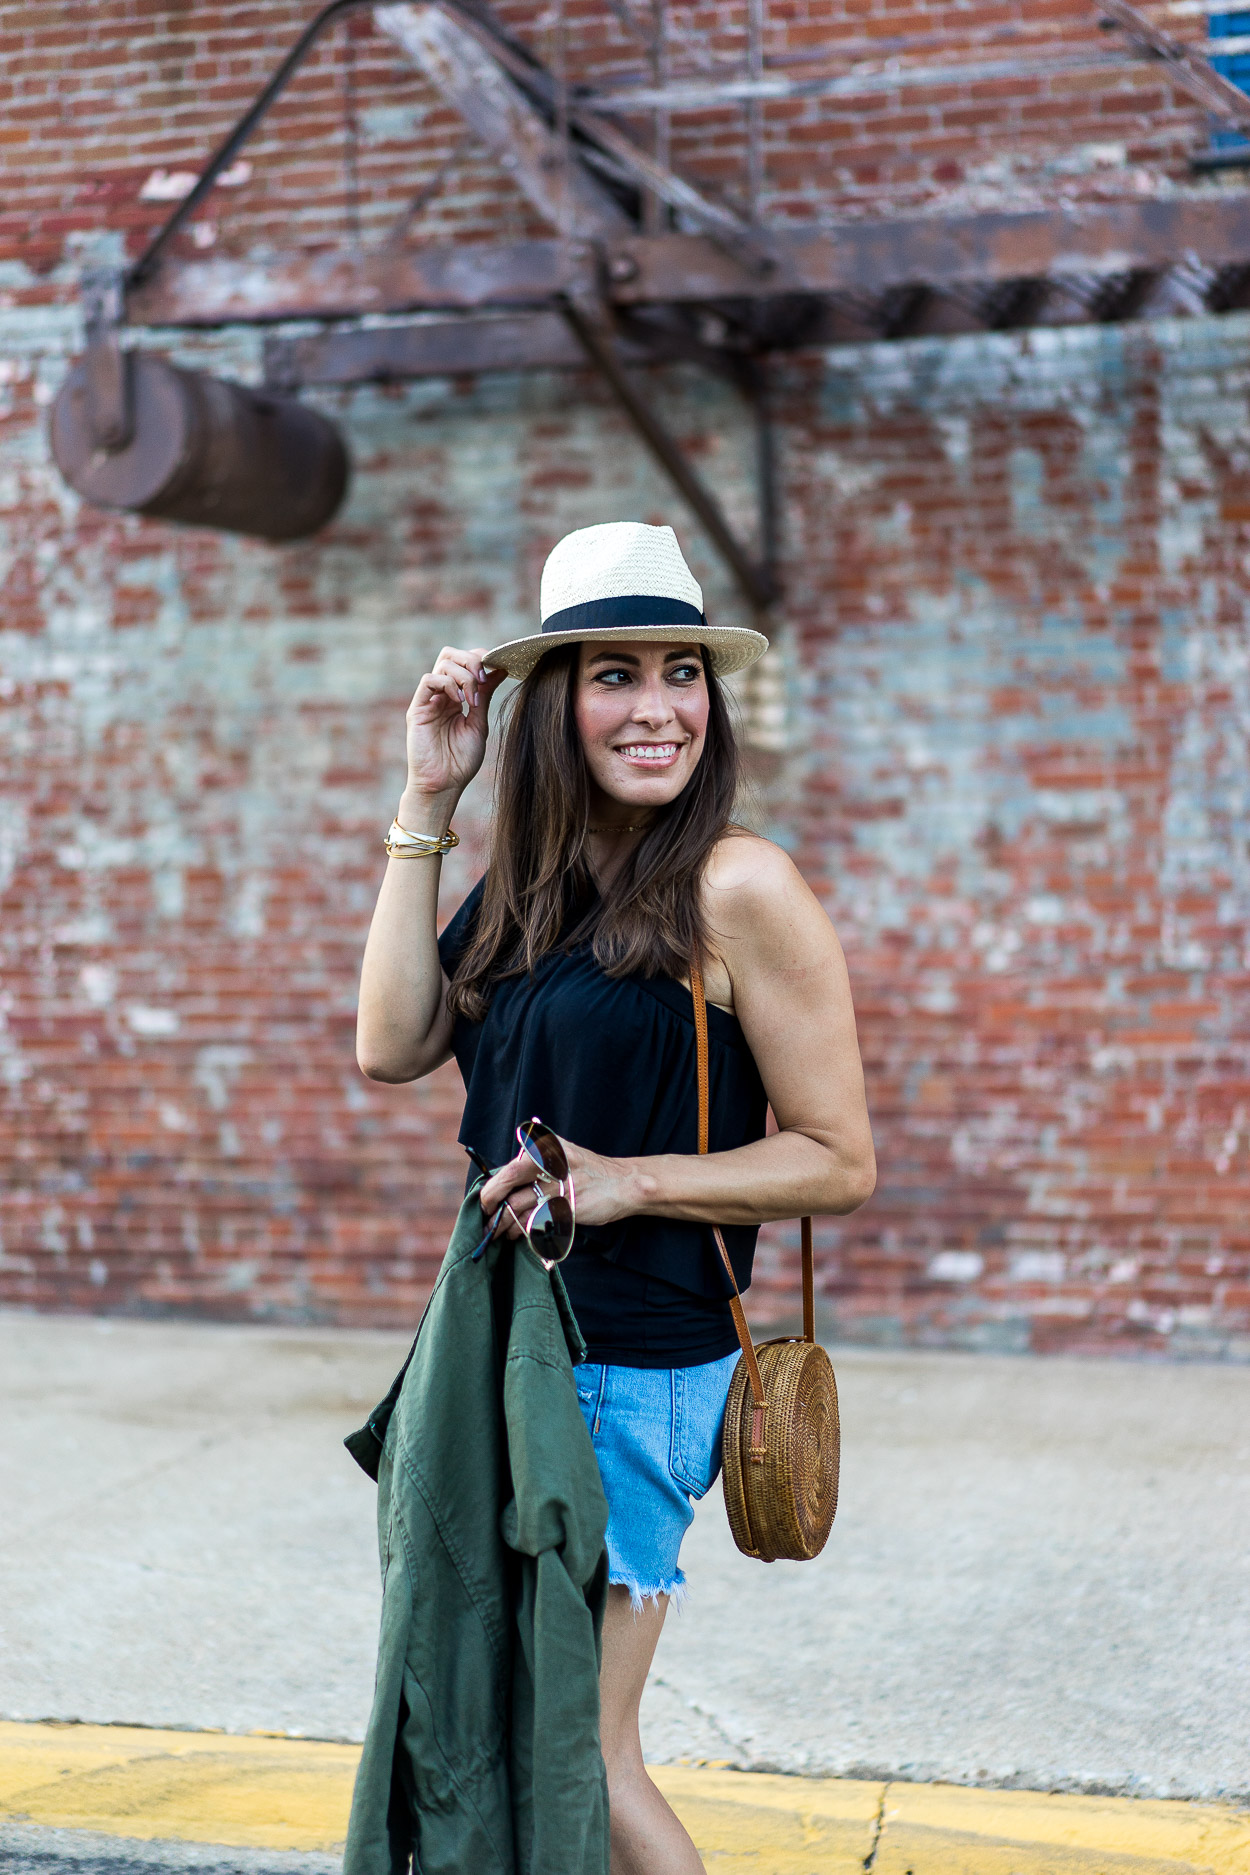 Perfect Summer fashion is this Three Dots black ruffled top with Utility jacket and fedora from Old Navy worn by AGlamLifestyle blogger Amanda